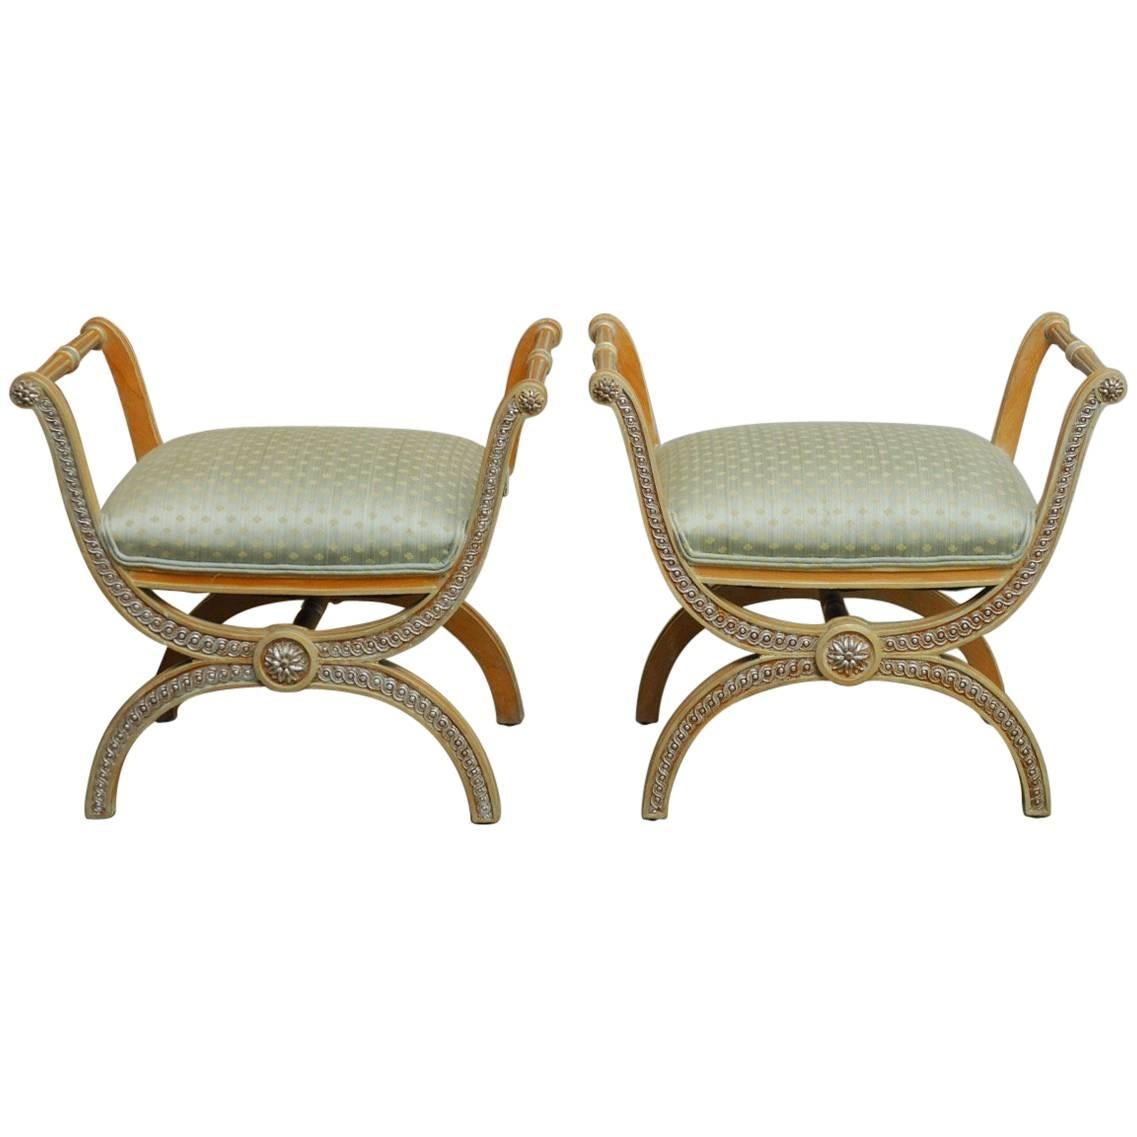 Pair of Italian Neoclassical X-Form Curule Benches